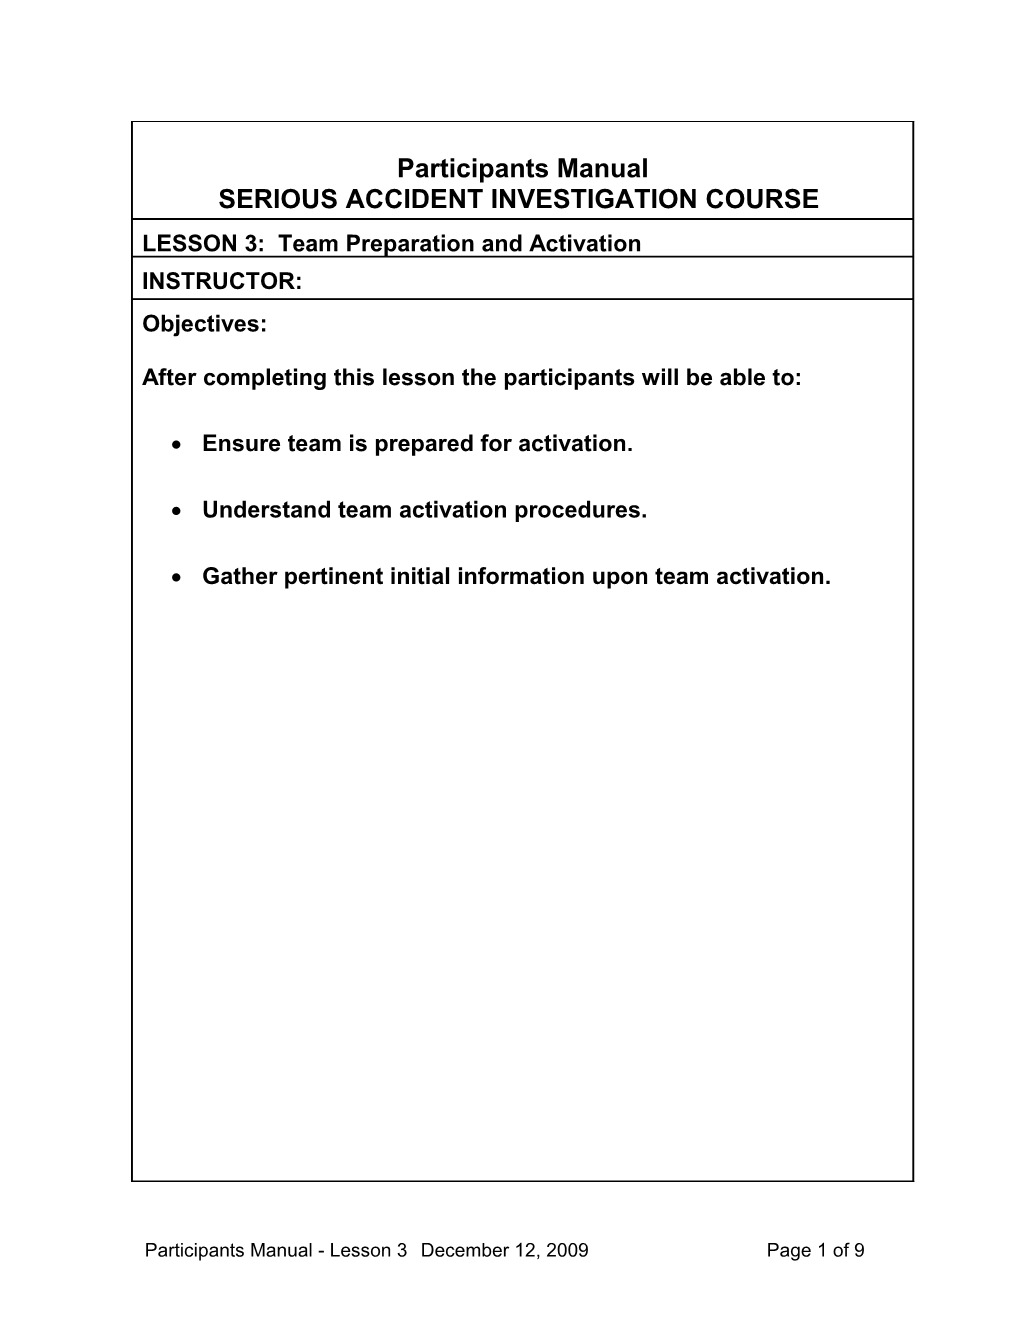 Serious Accident Investigation Course